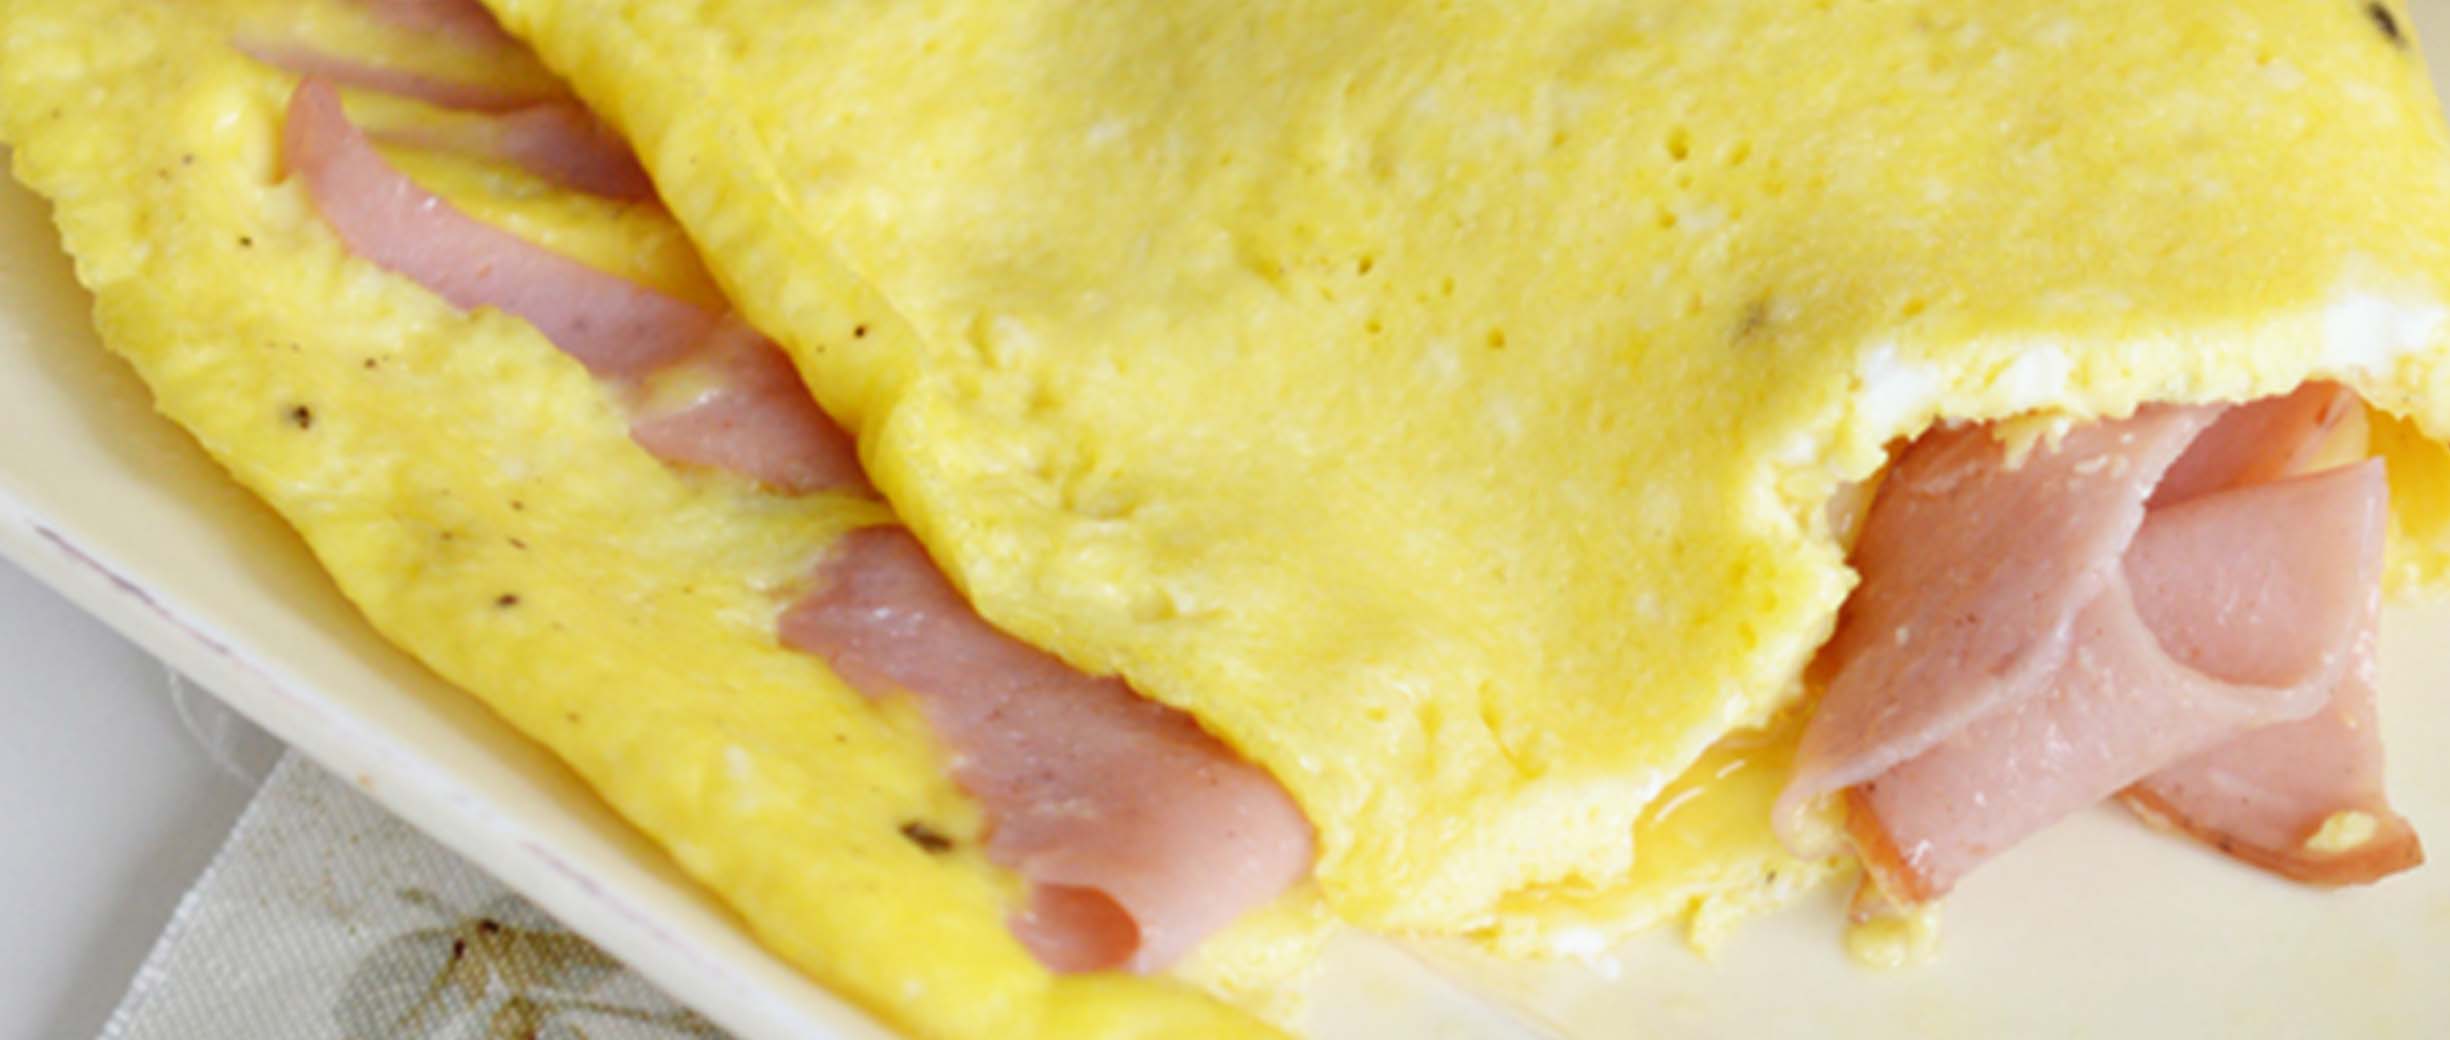 Five Tips for Amazing Omelets